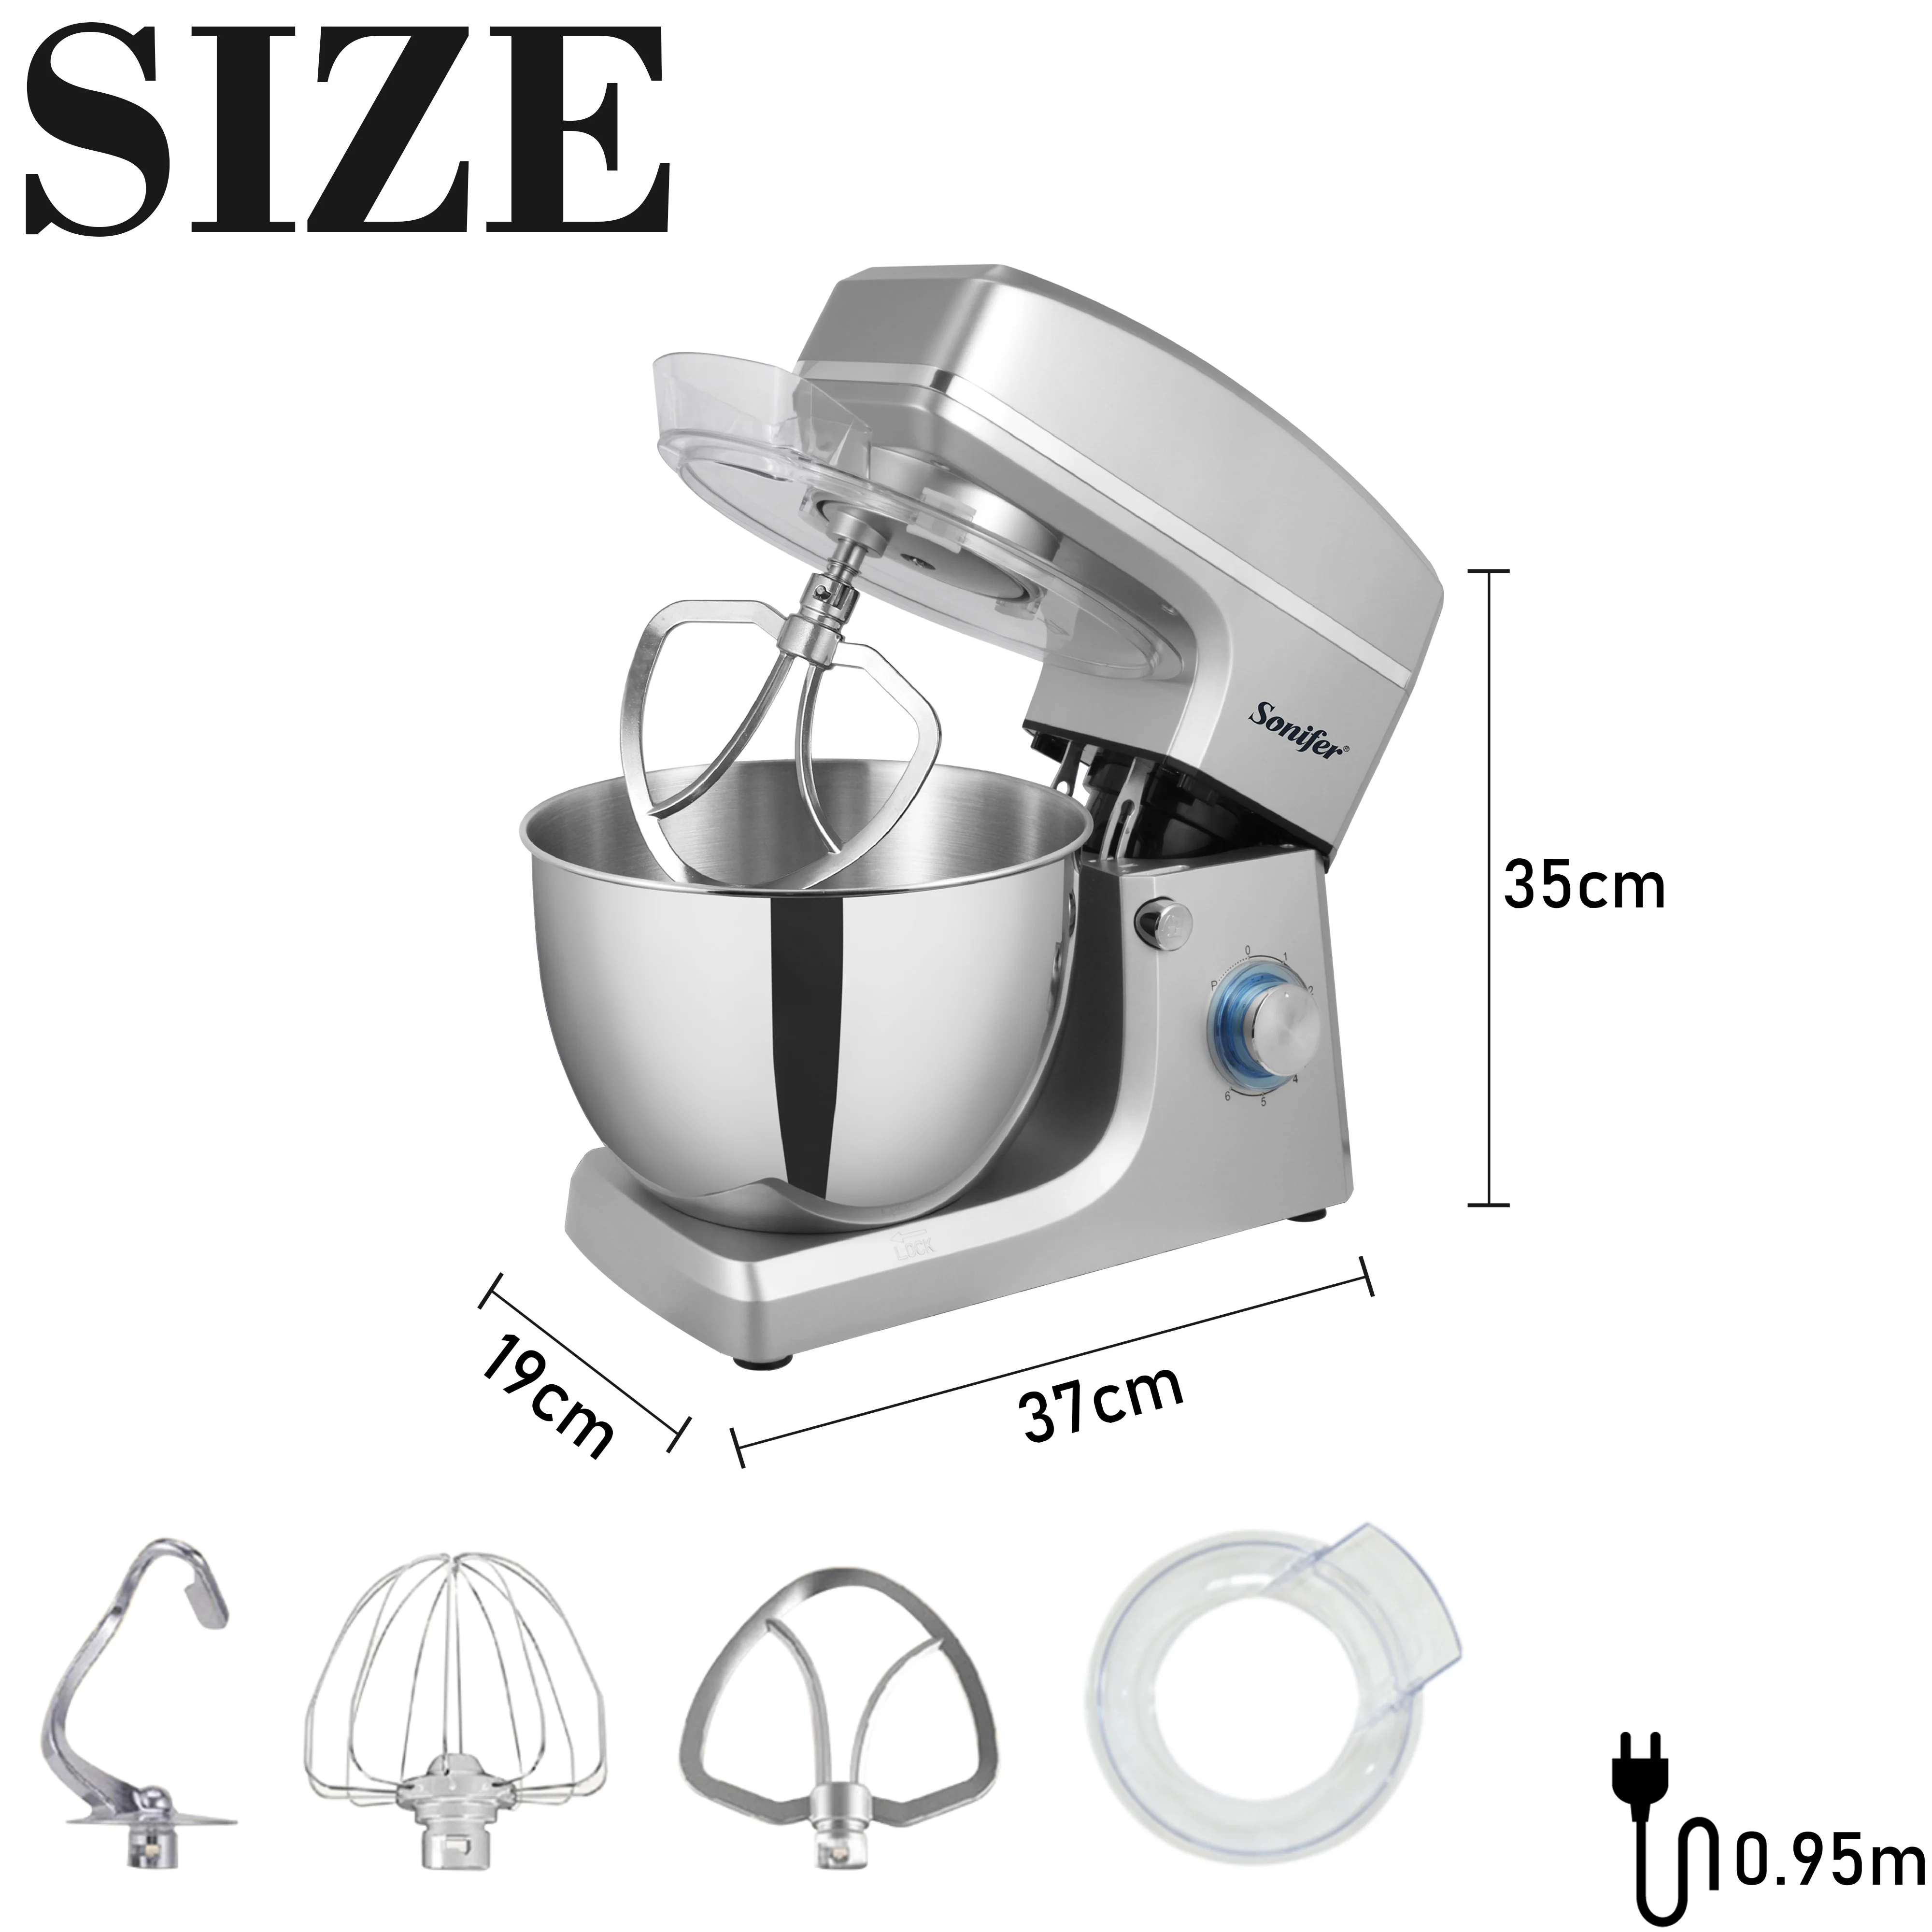 https://ae01.alicdn.com/kf/S6ca7b16936244714aed3d6a7d95b8051Y/Sonifer-8L-Stand-Mixer-Kitchen-Aid-Food-Blender-Cream-Whisk-Cake-Dough-Mixers-With-Bowl-Stainless.jpg